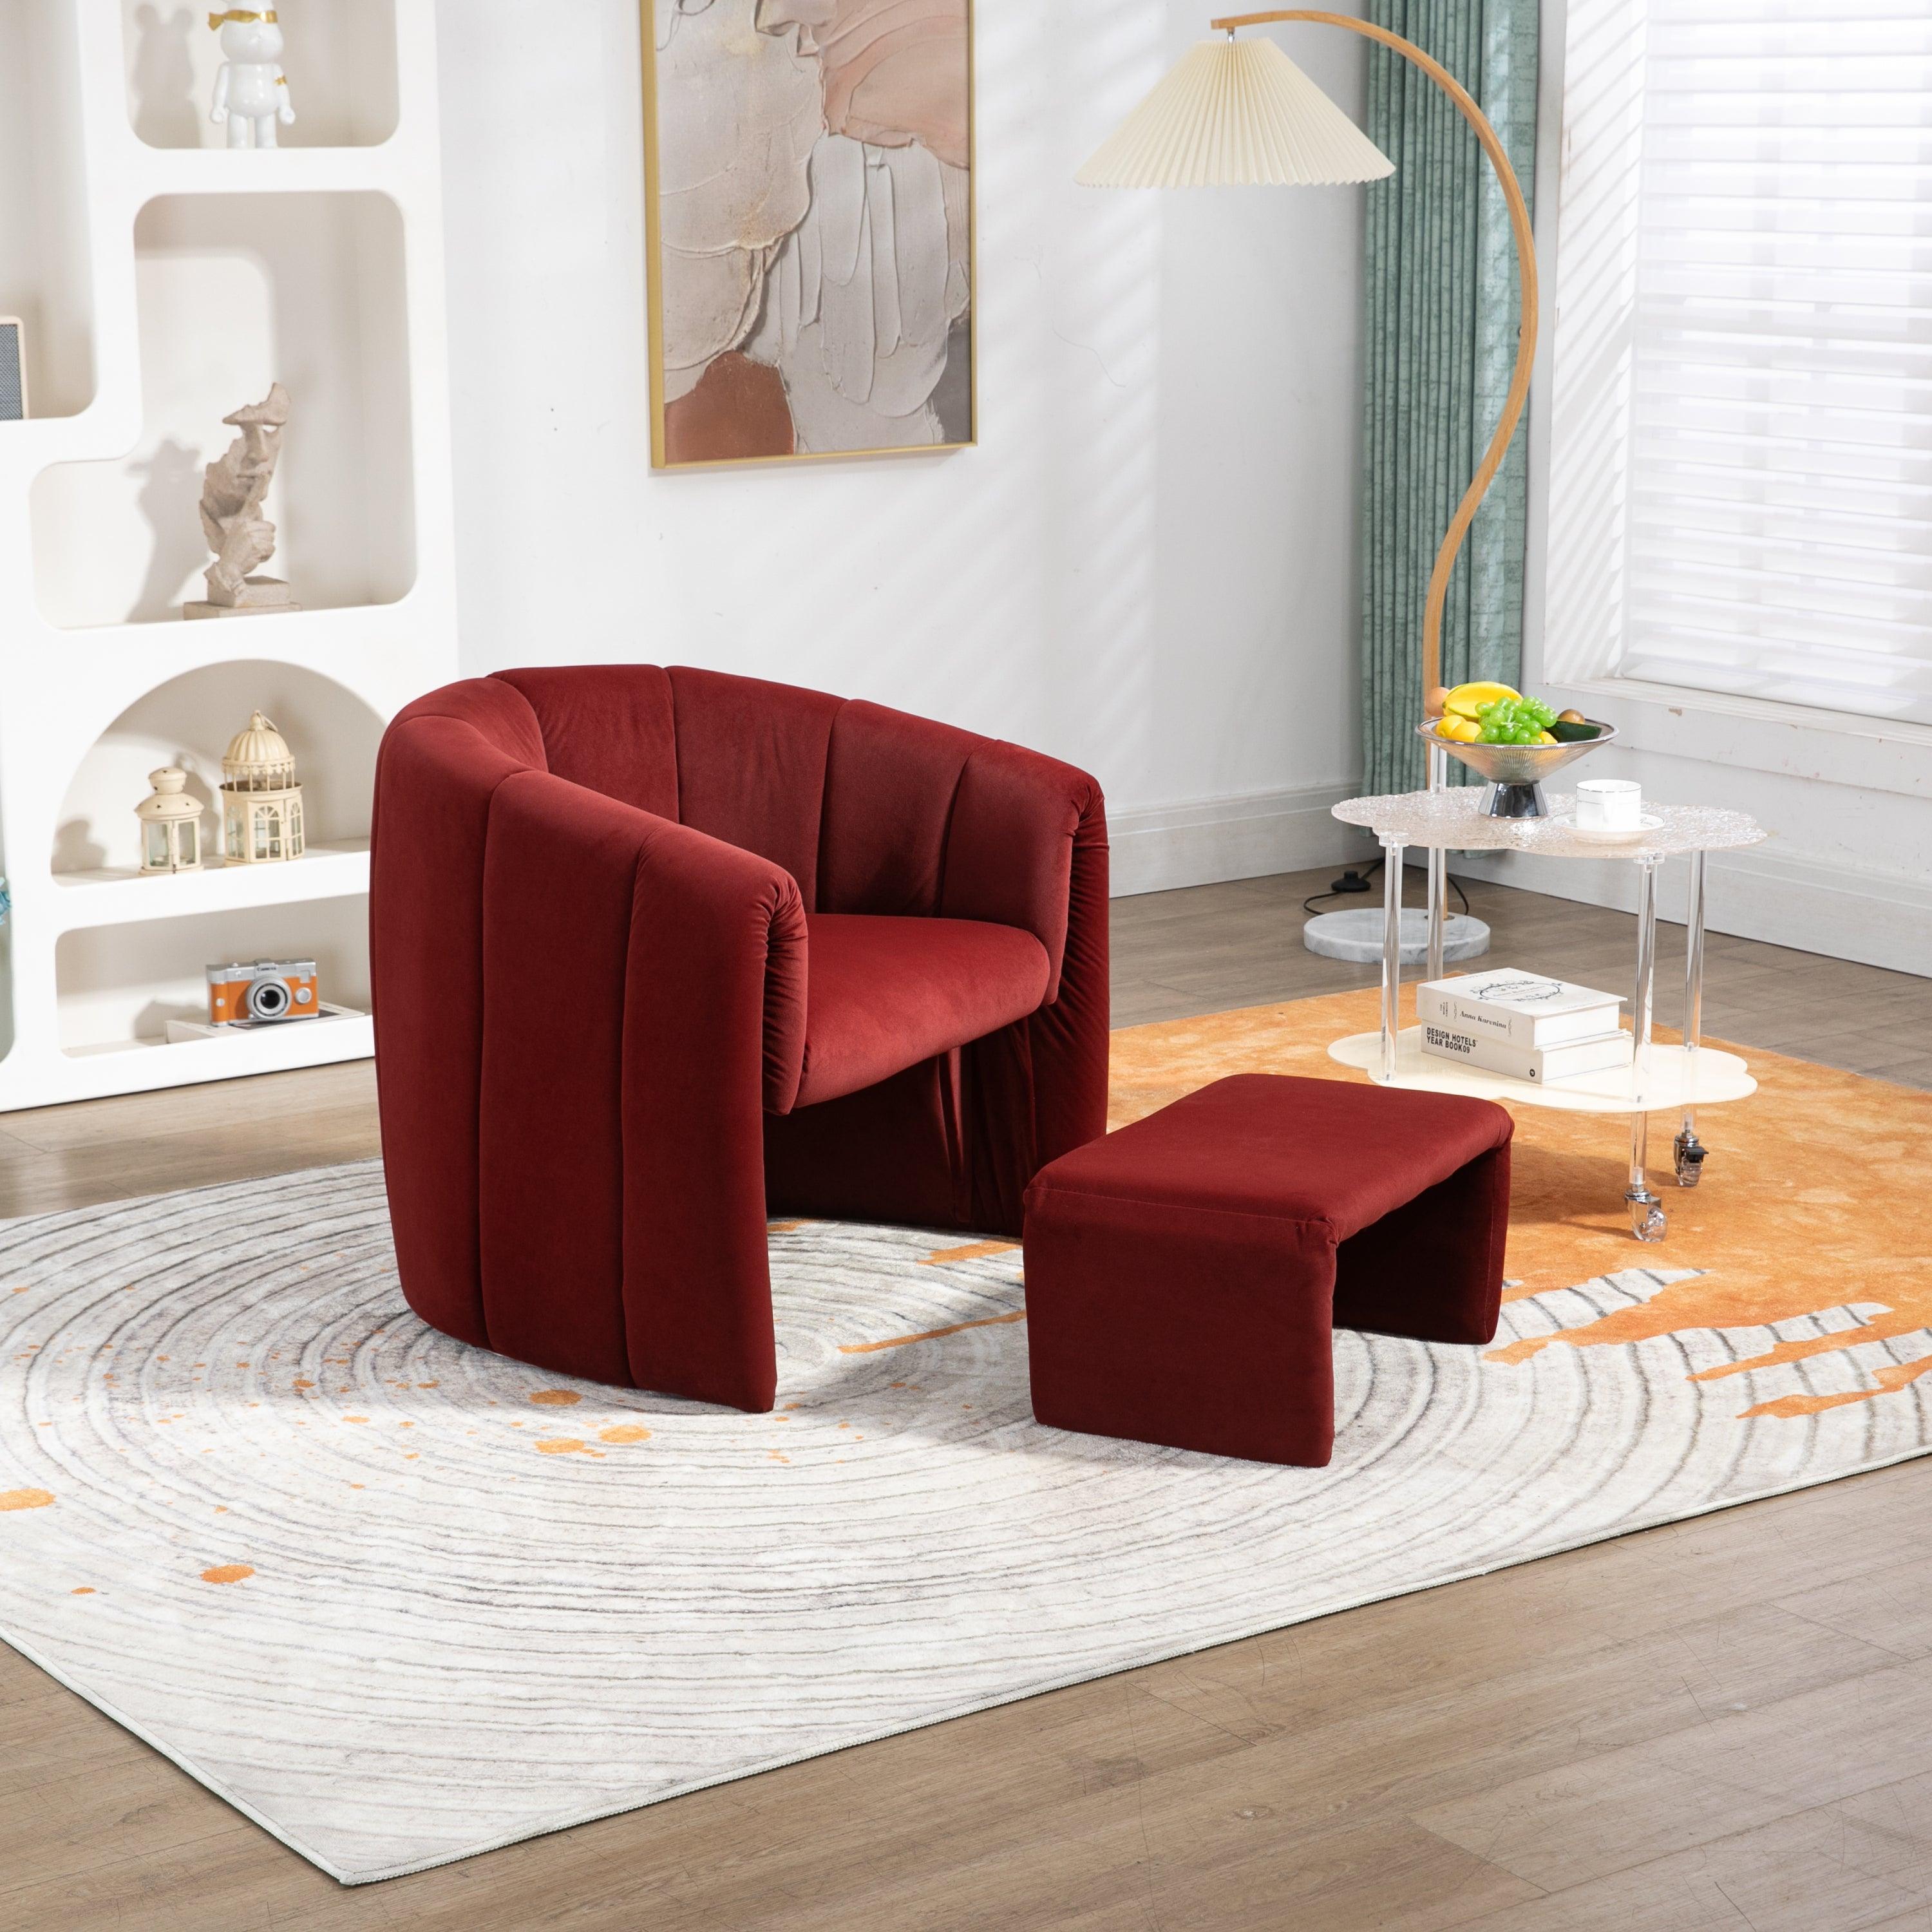 🆓🚛 Yungee Mid Century Modern Barrel Accent Chair With Ottoman Set, Wine Red